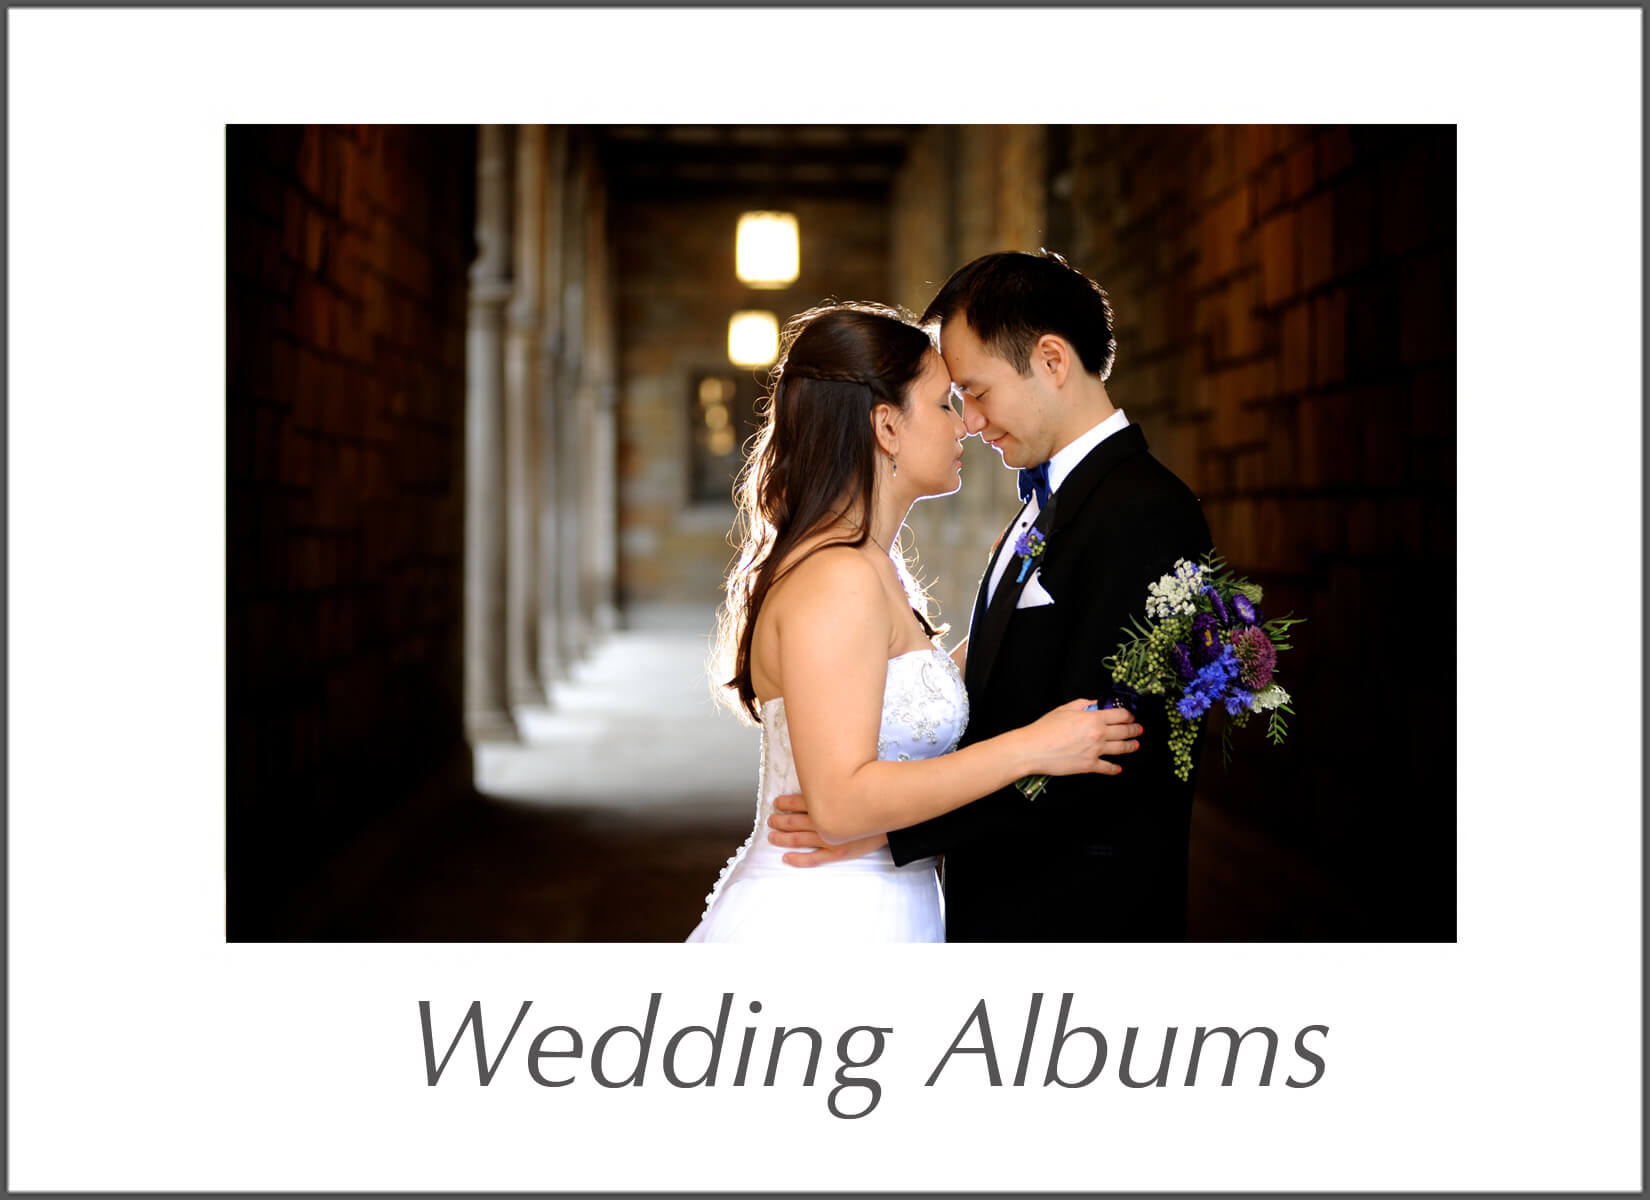 Michigan wedding Photographer offers several different large wedding albums including a 14 x 11 inch flush mount photo album.